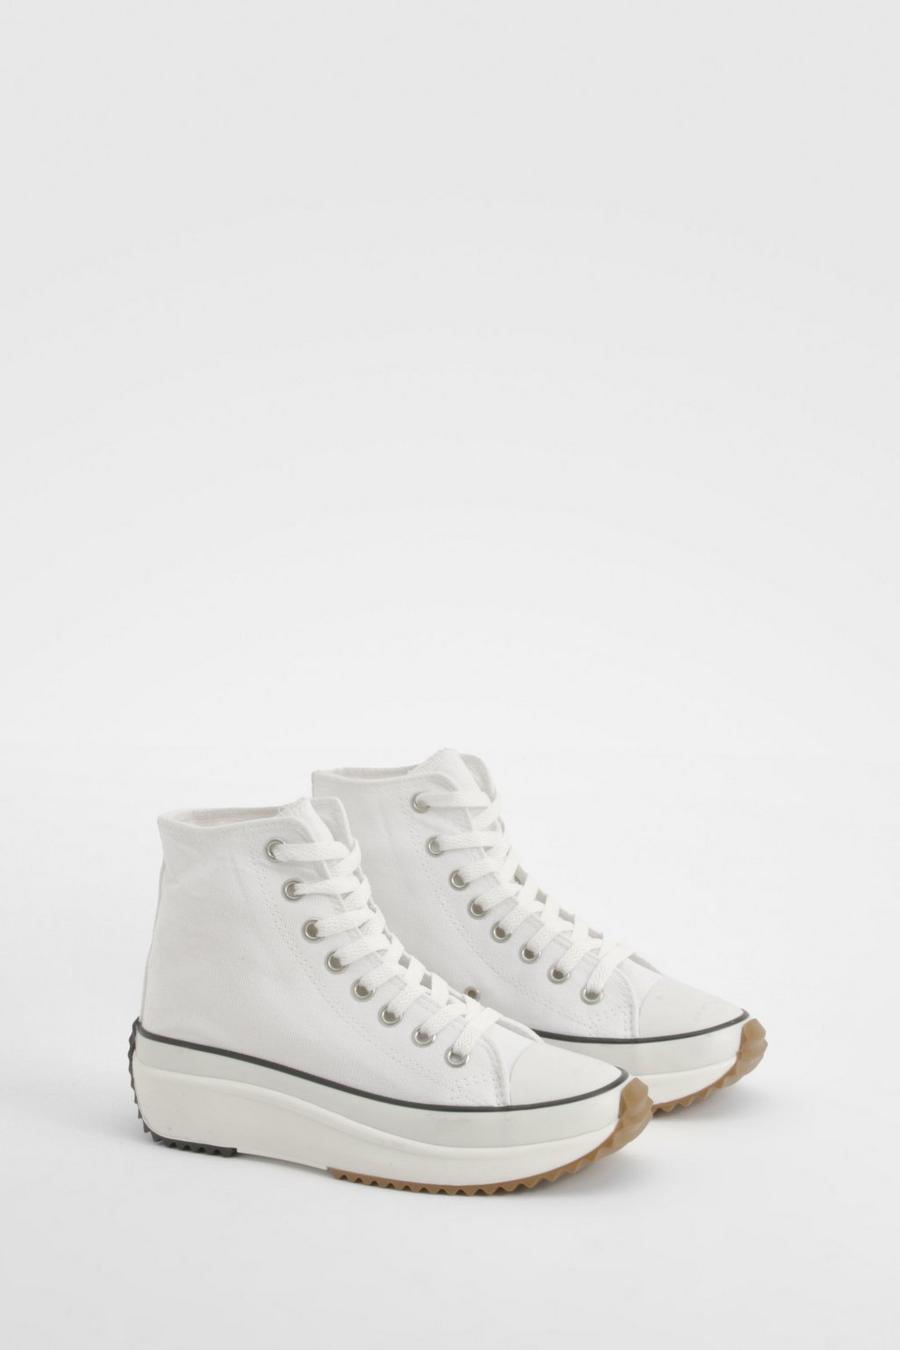 White Chunky Platform High Top Sneakers